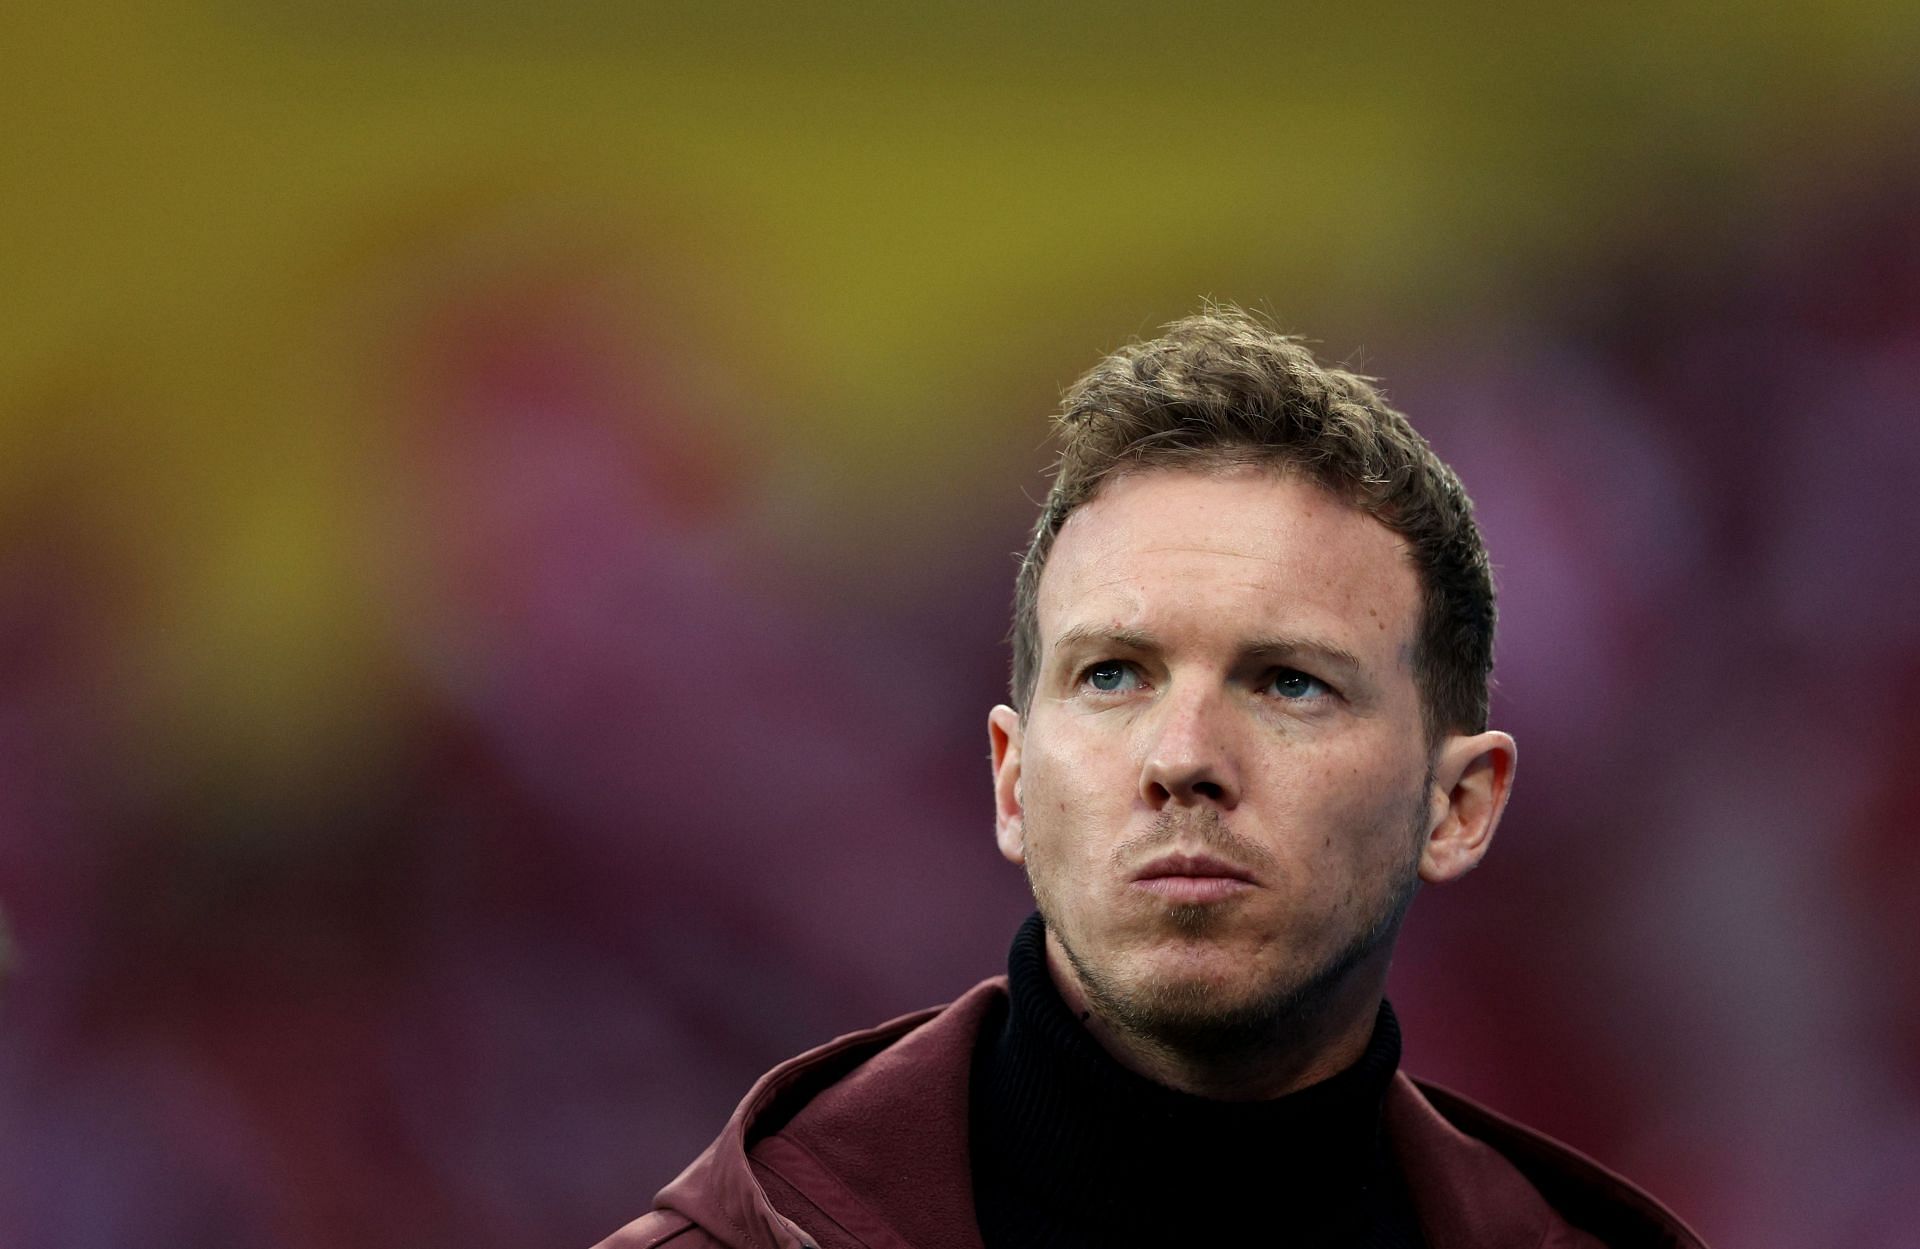 Julian Nagelsmann is likely to take charge at Paris this summer.